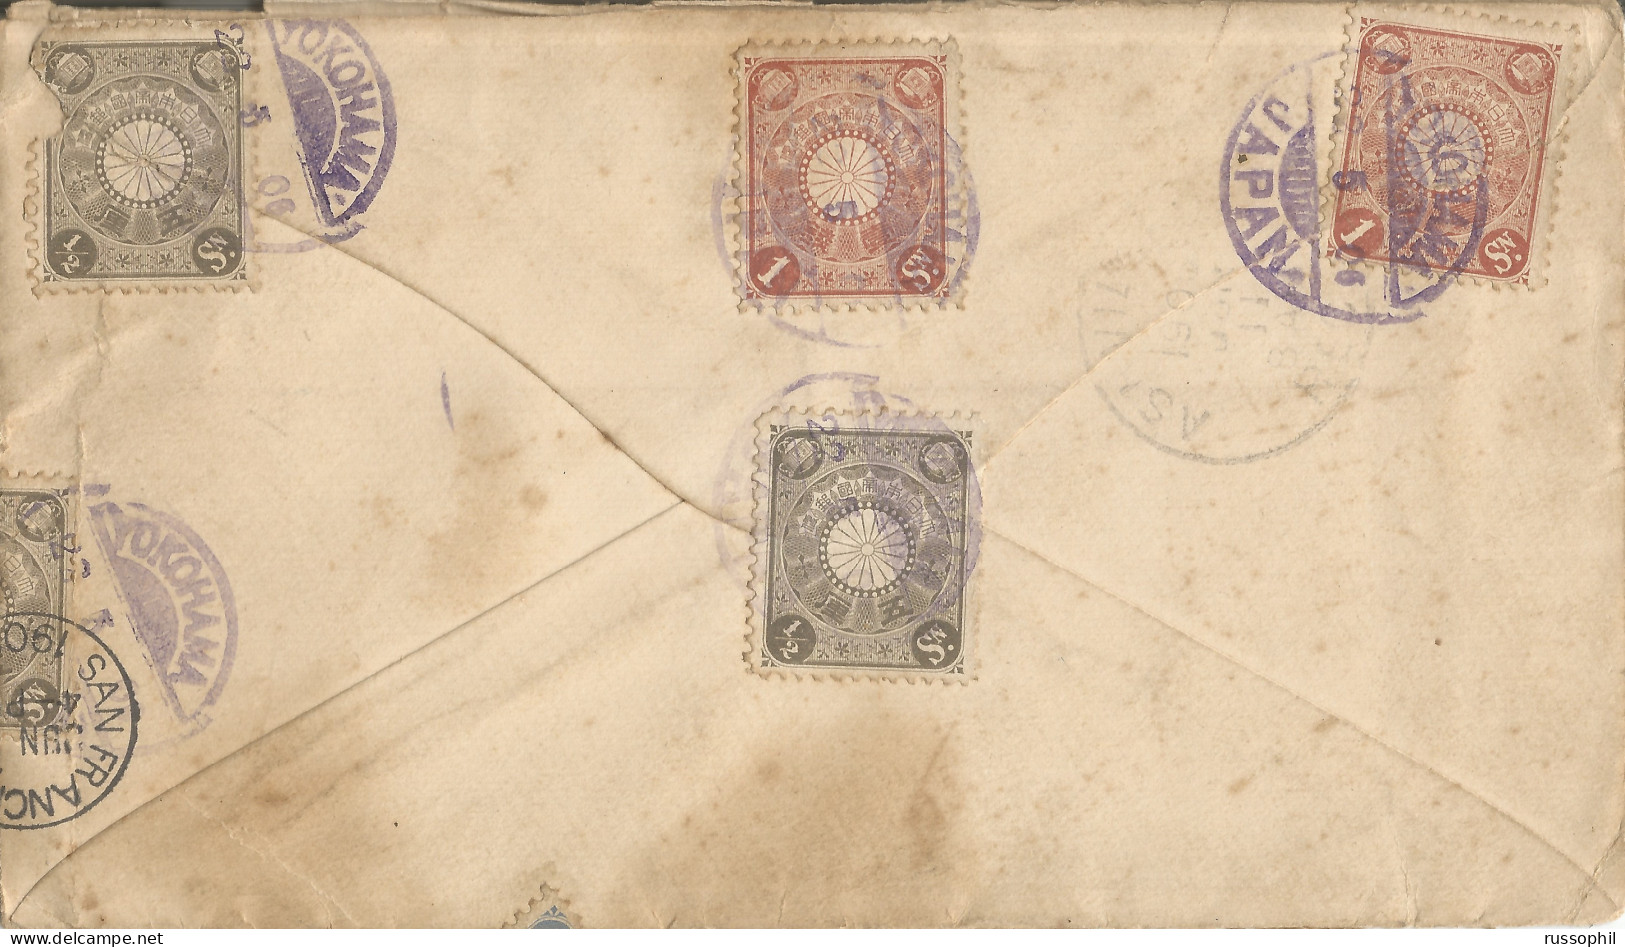 JAPAN - SPECTACULAR 20 SEN 21 STAMP FOUR COLOUR FRANKING ON COVER FROM YOKOHAMA TO THE US - 1906 - Lettres & Documents